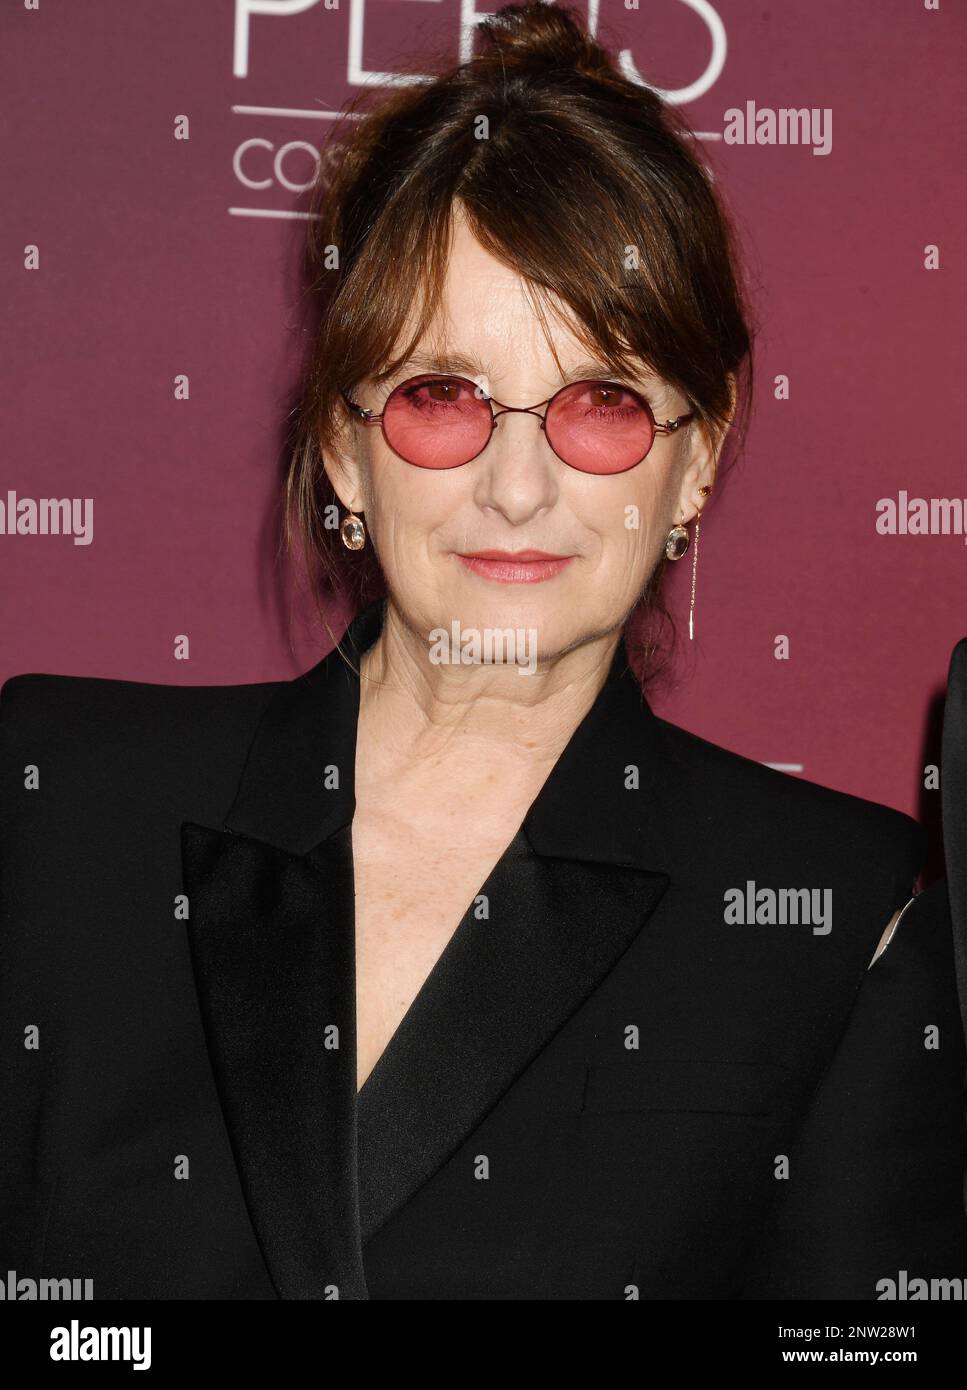 LOS ANGELES, CALIFORNIA - FEBRUARY 27: Bina Daigeler attends the 25th Annual Costume Designers Guild Awards at the Fairmont Century Plaza on February Stock Photo